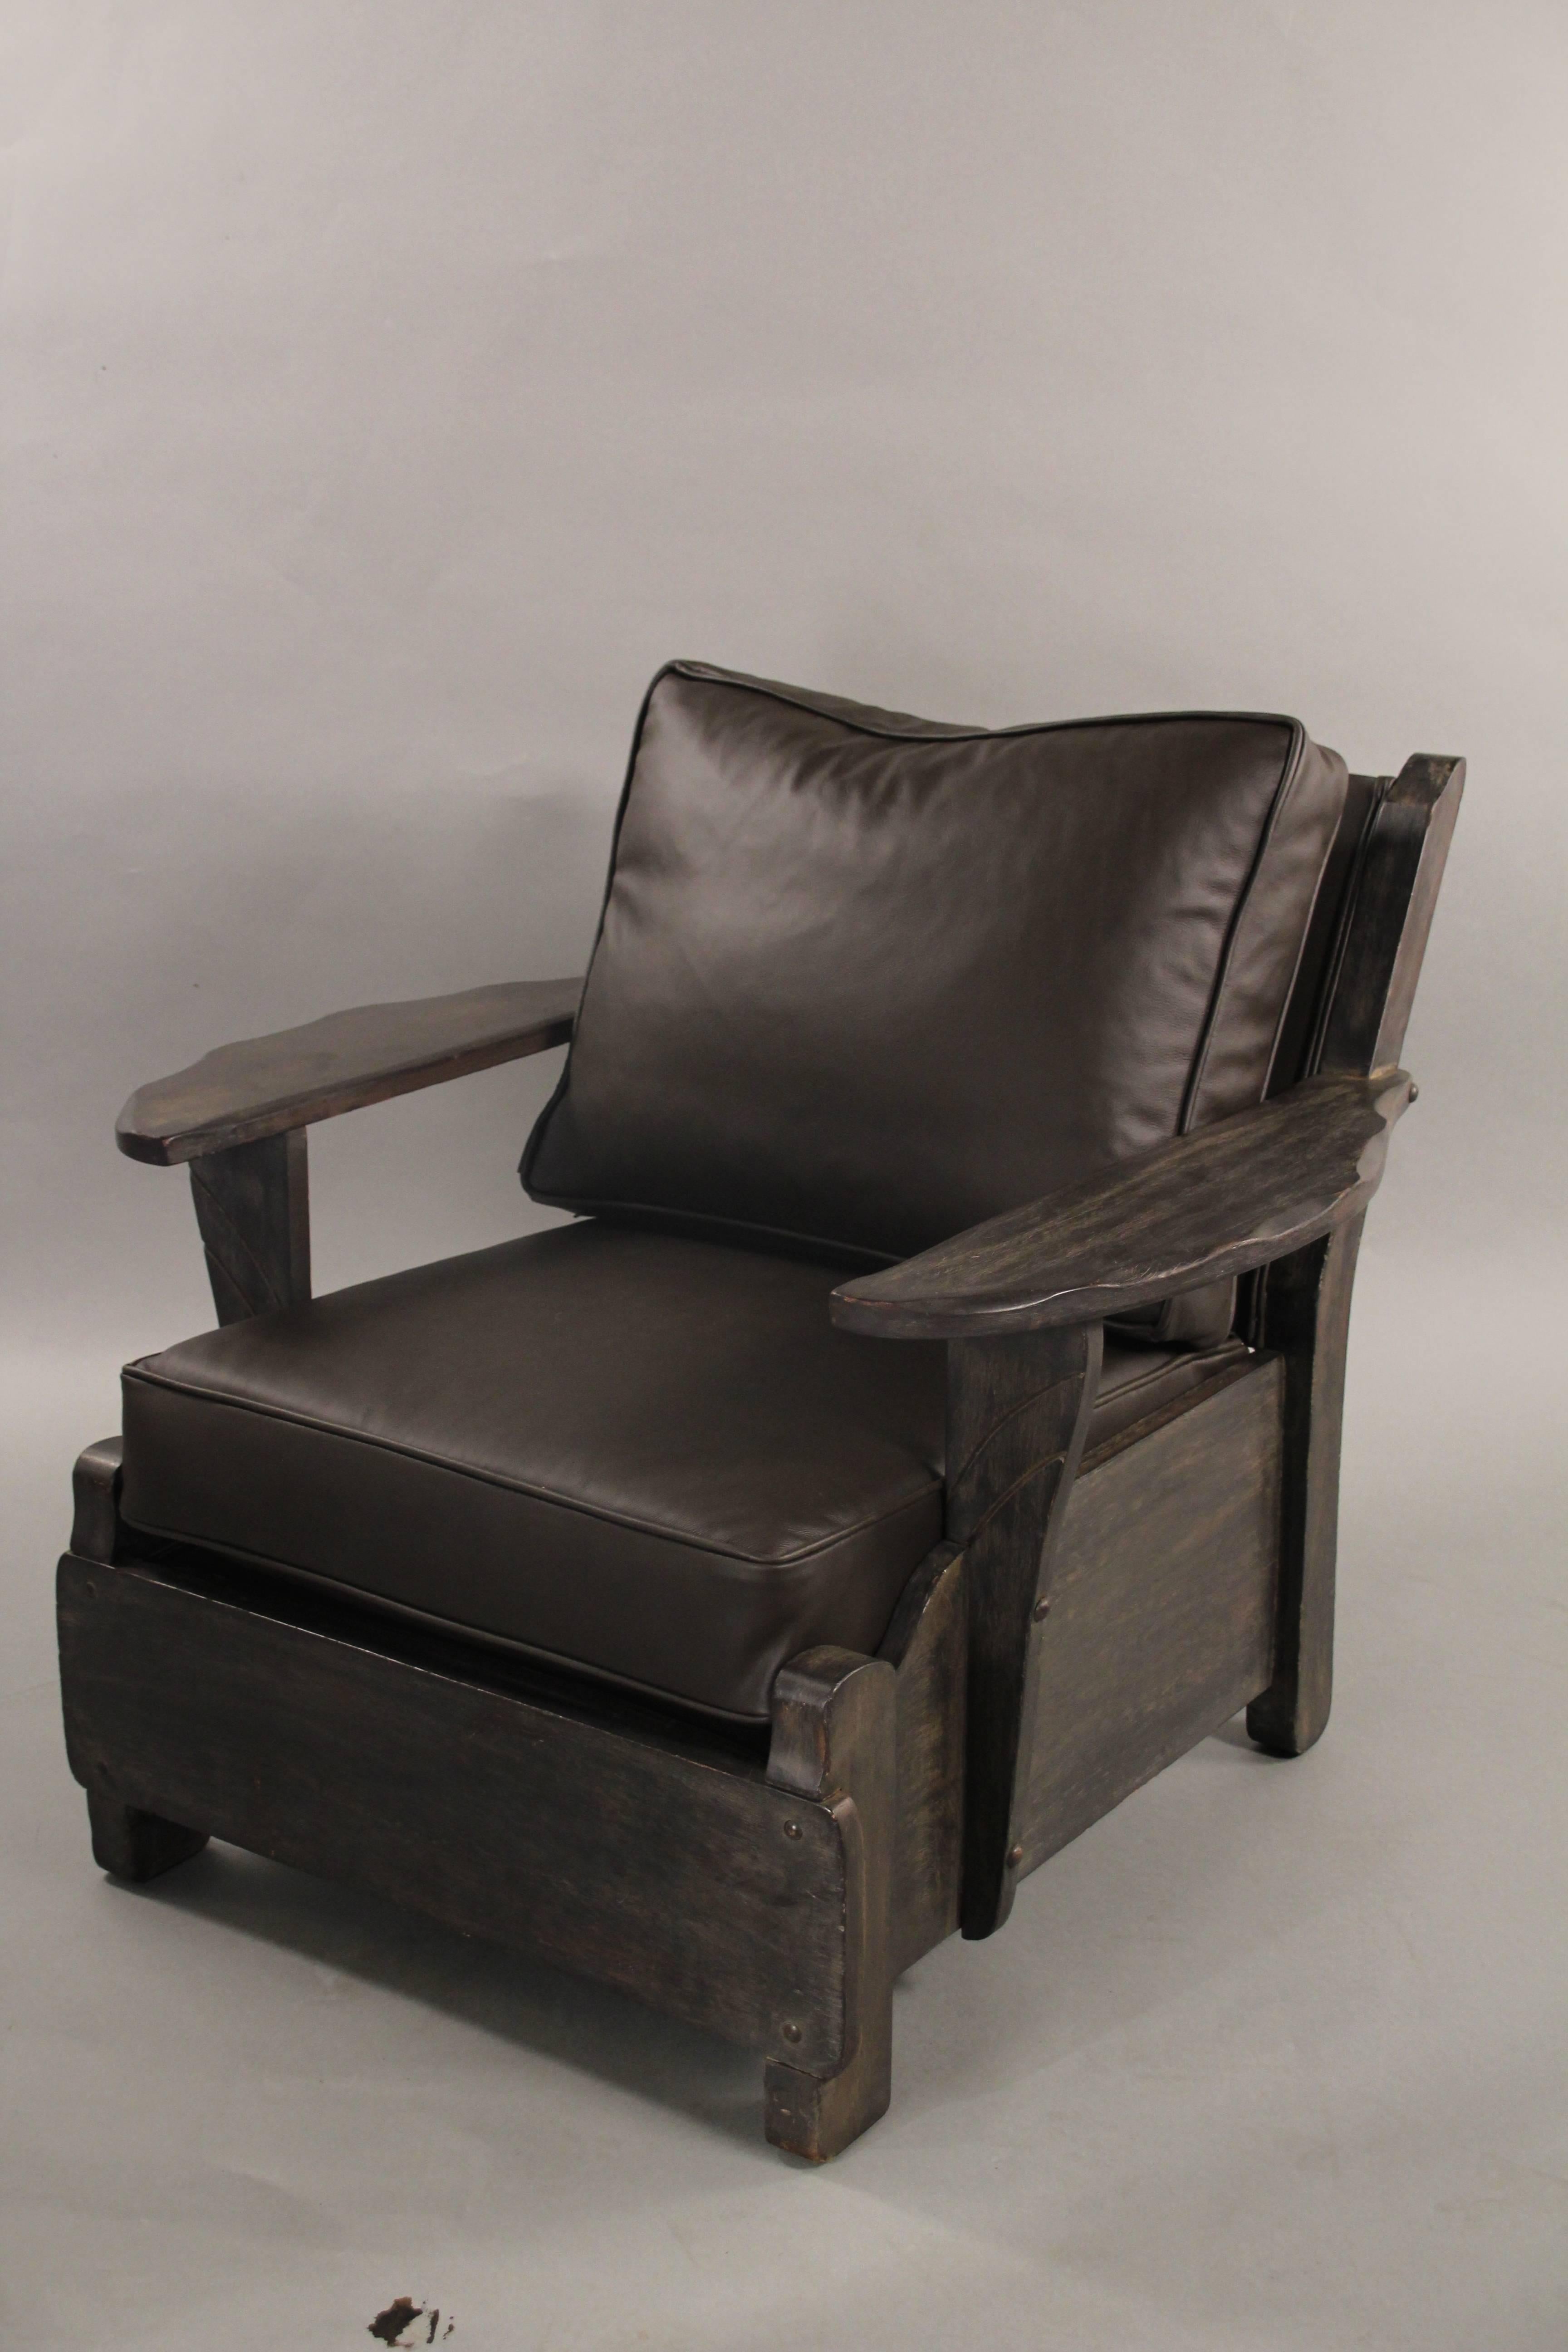 Monterey side chair with new leather upholstery, circa 1930s. Restored finish.